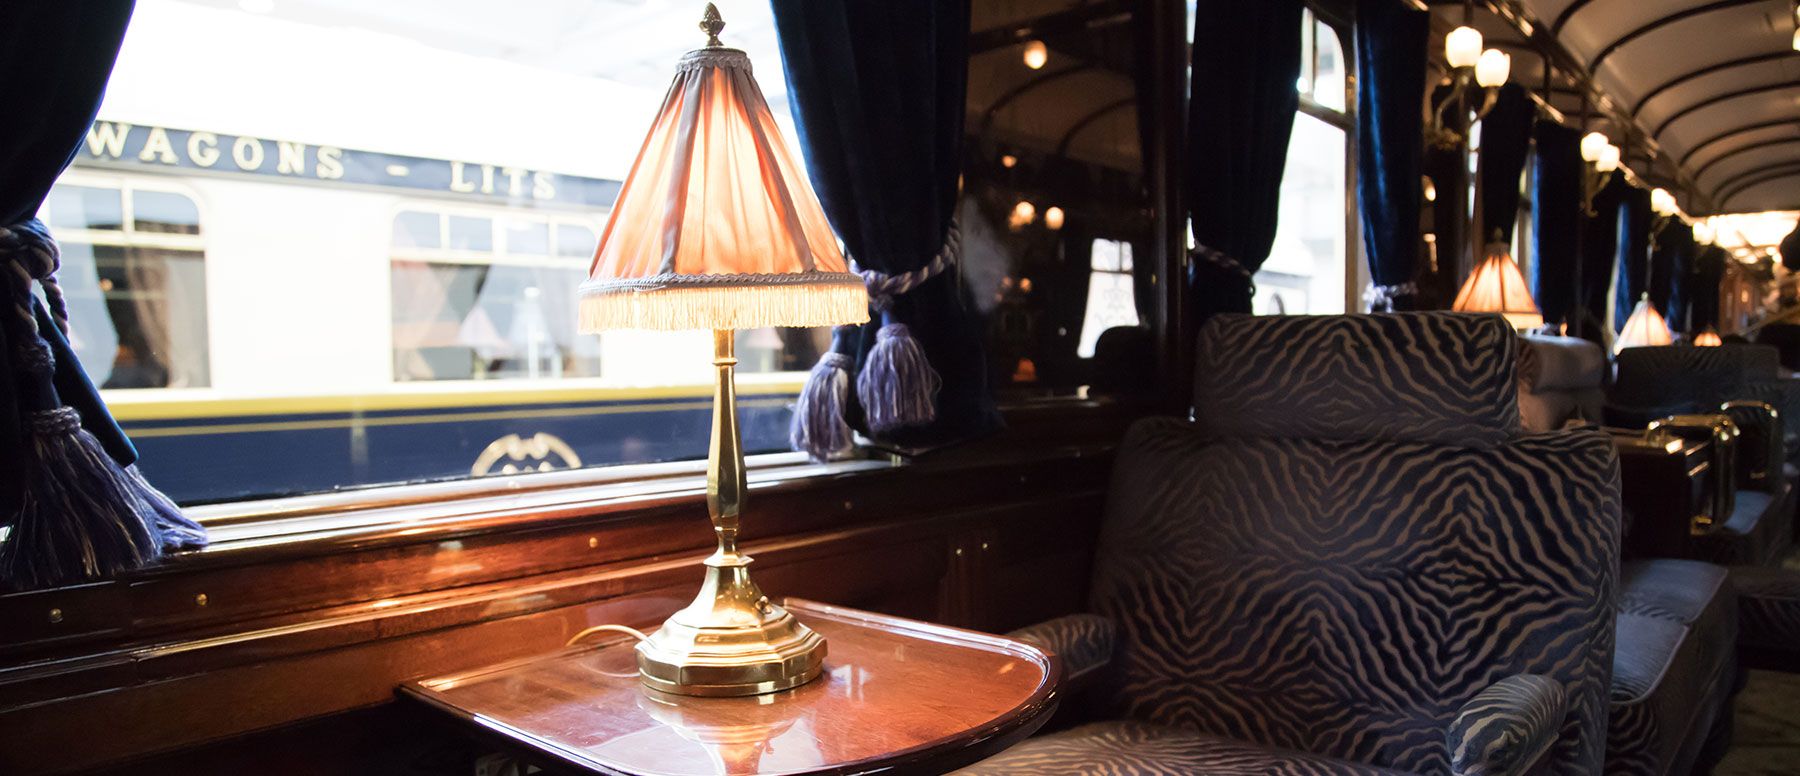 The luxury train arrives in Italy: price and itinerary of the Orient Express La Dolce Vita